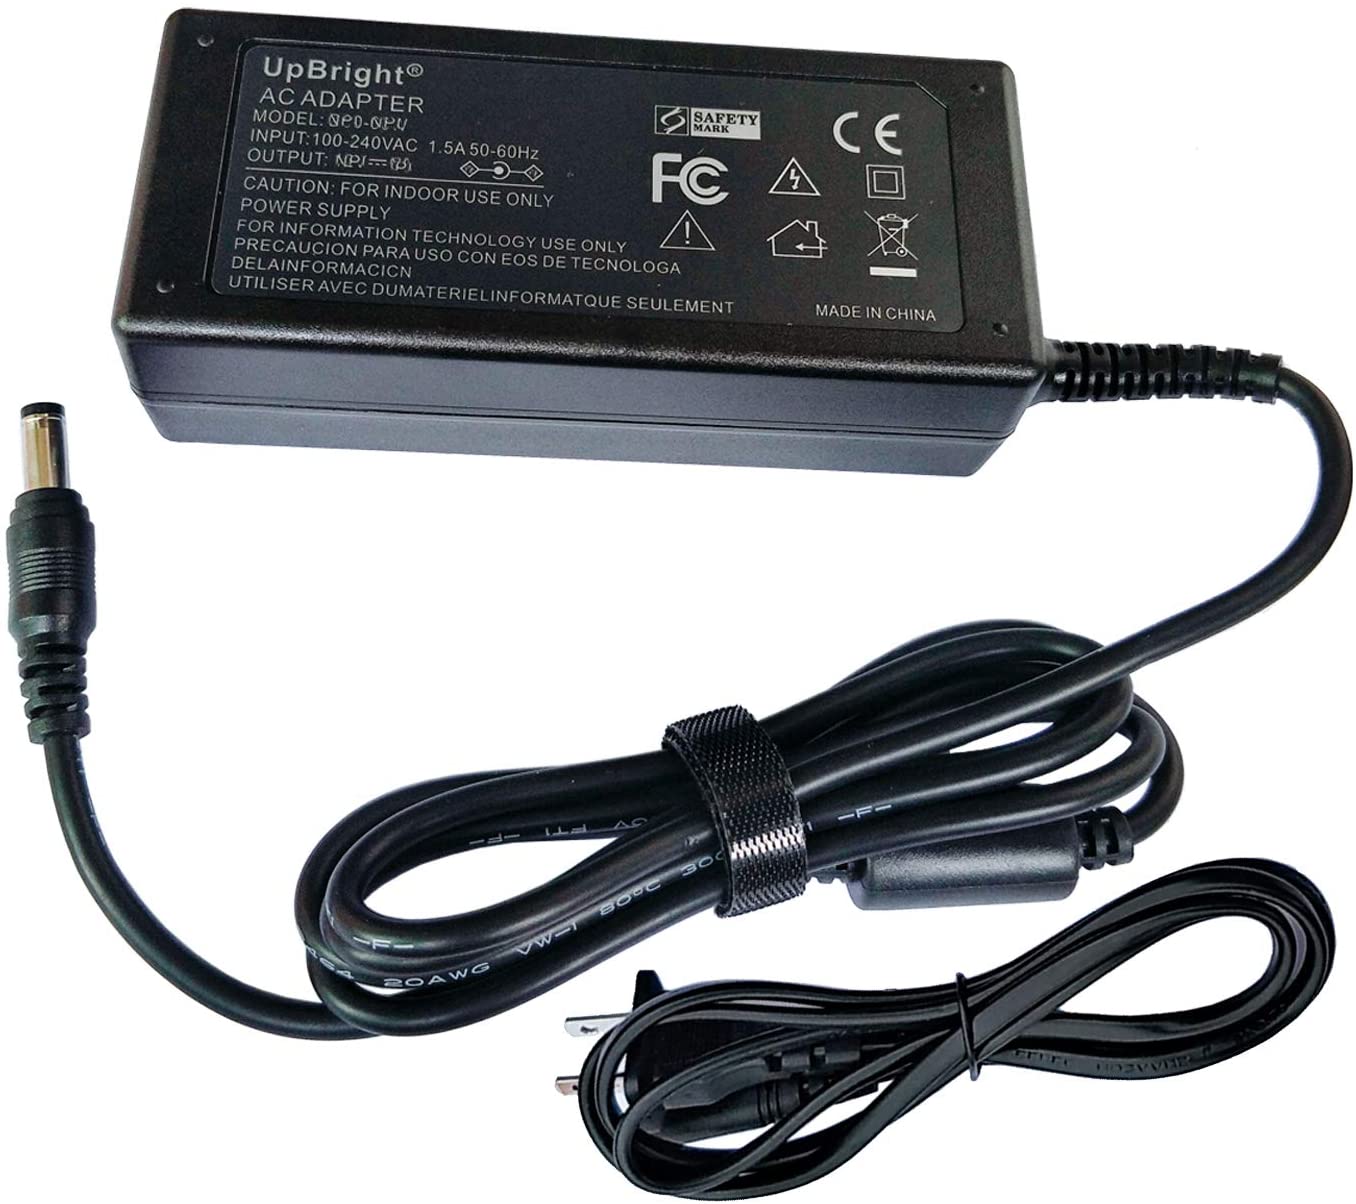 UPBRIGHT NEW AC DC Adapter For Zebra LP 2824 Plus 282P-201110-000 282P -101110-000 Direct Label Thermal Desktop Printer Power Supply Cord Cable PS  Charger Input: 100 240 VAC Worldwide Use PSU